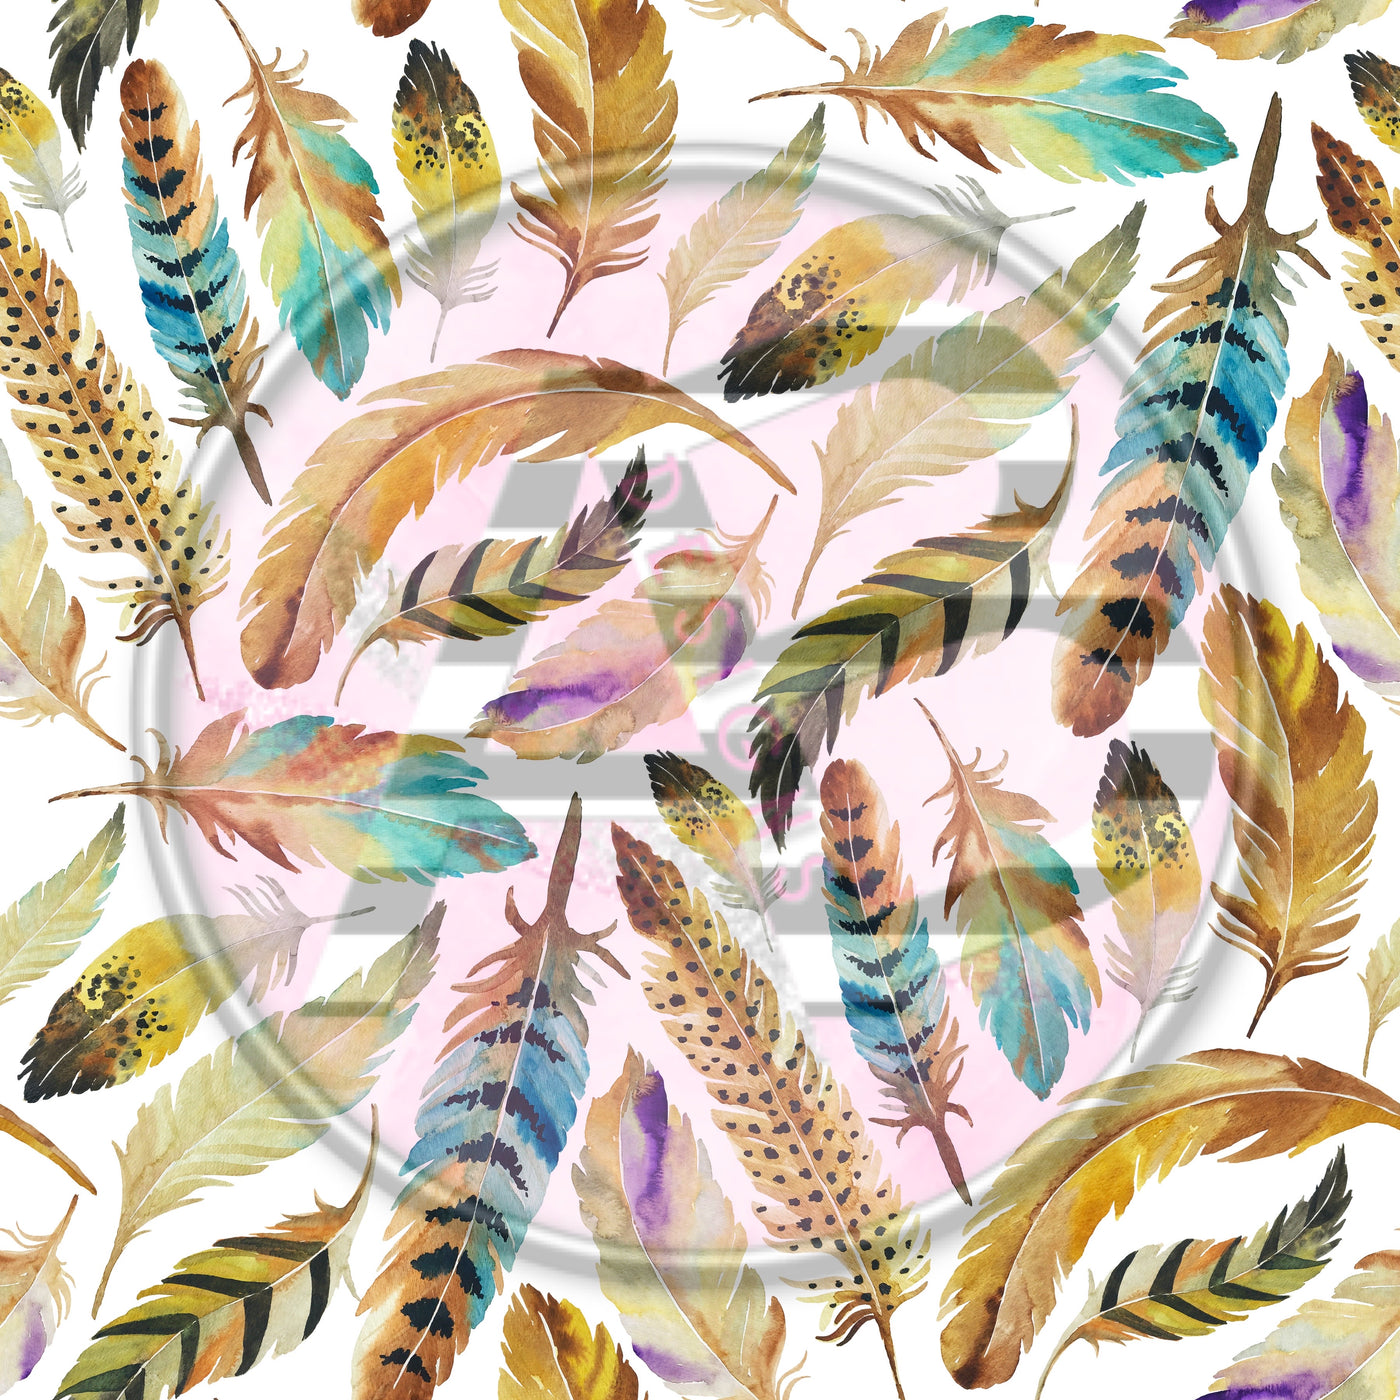 Adhesive Patterned Vinyl - Feathers 275